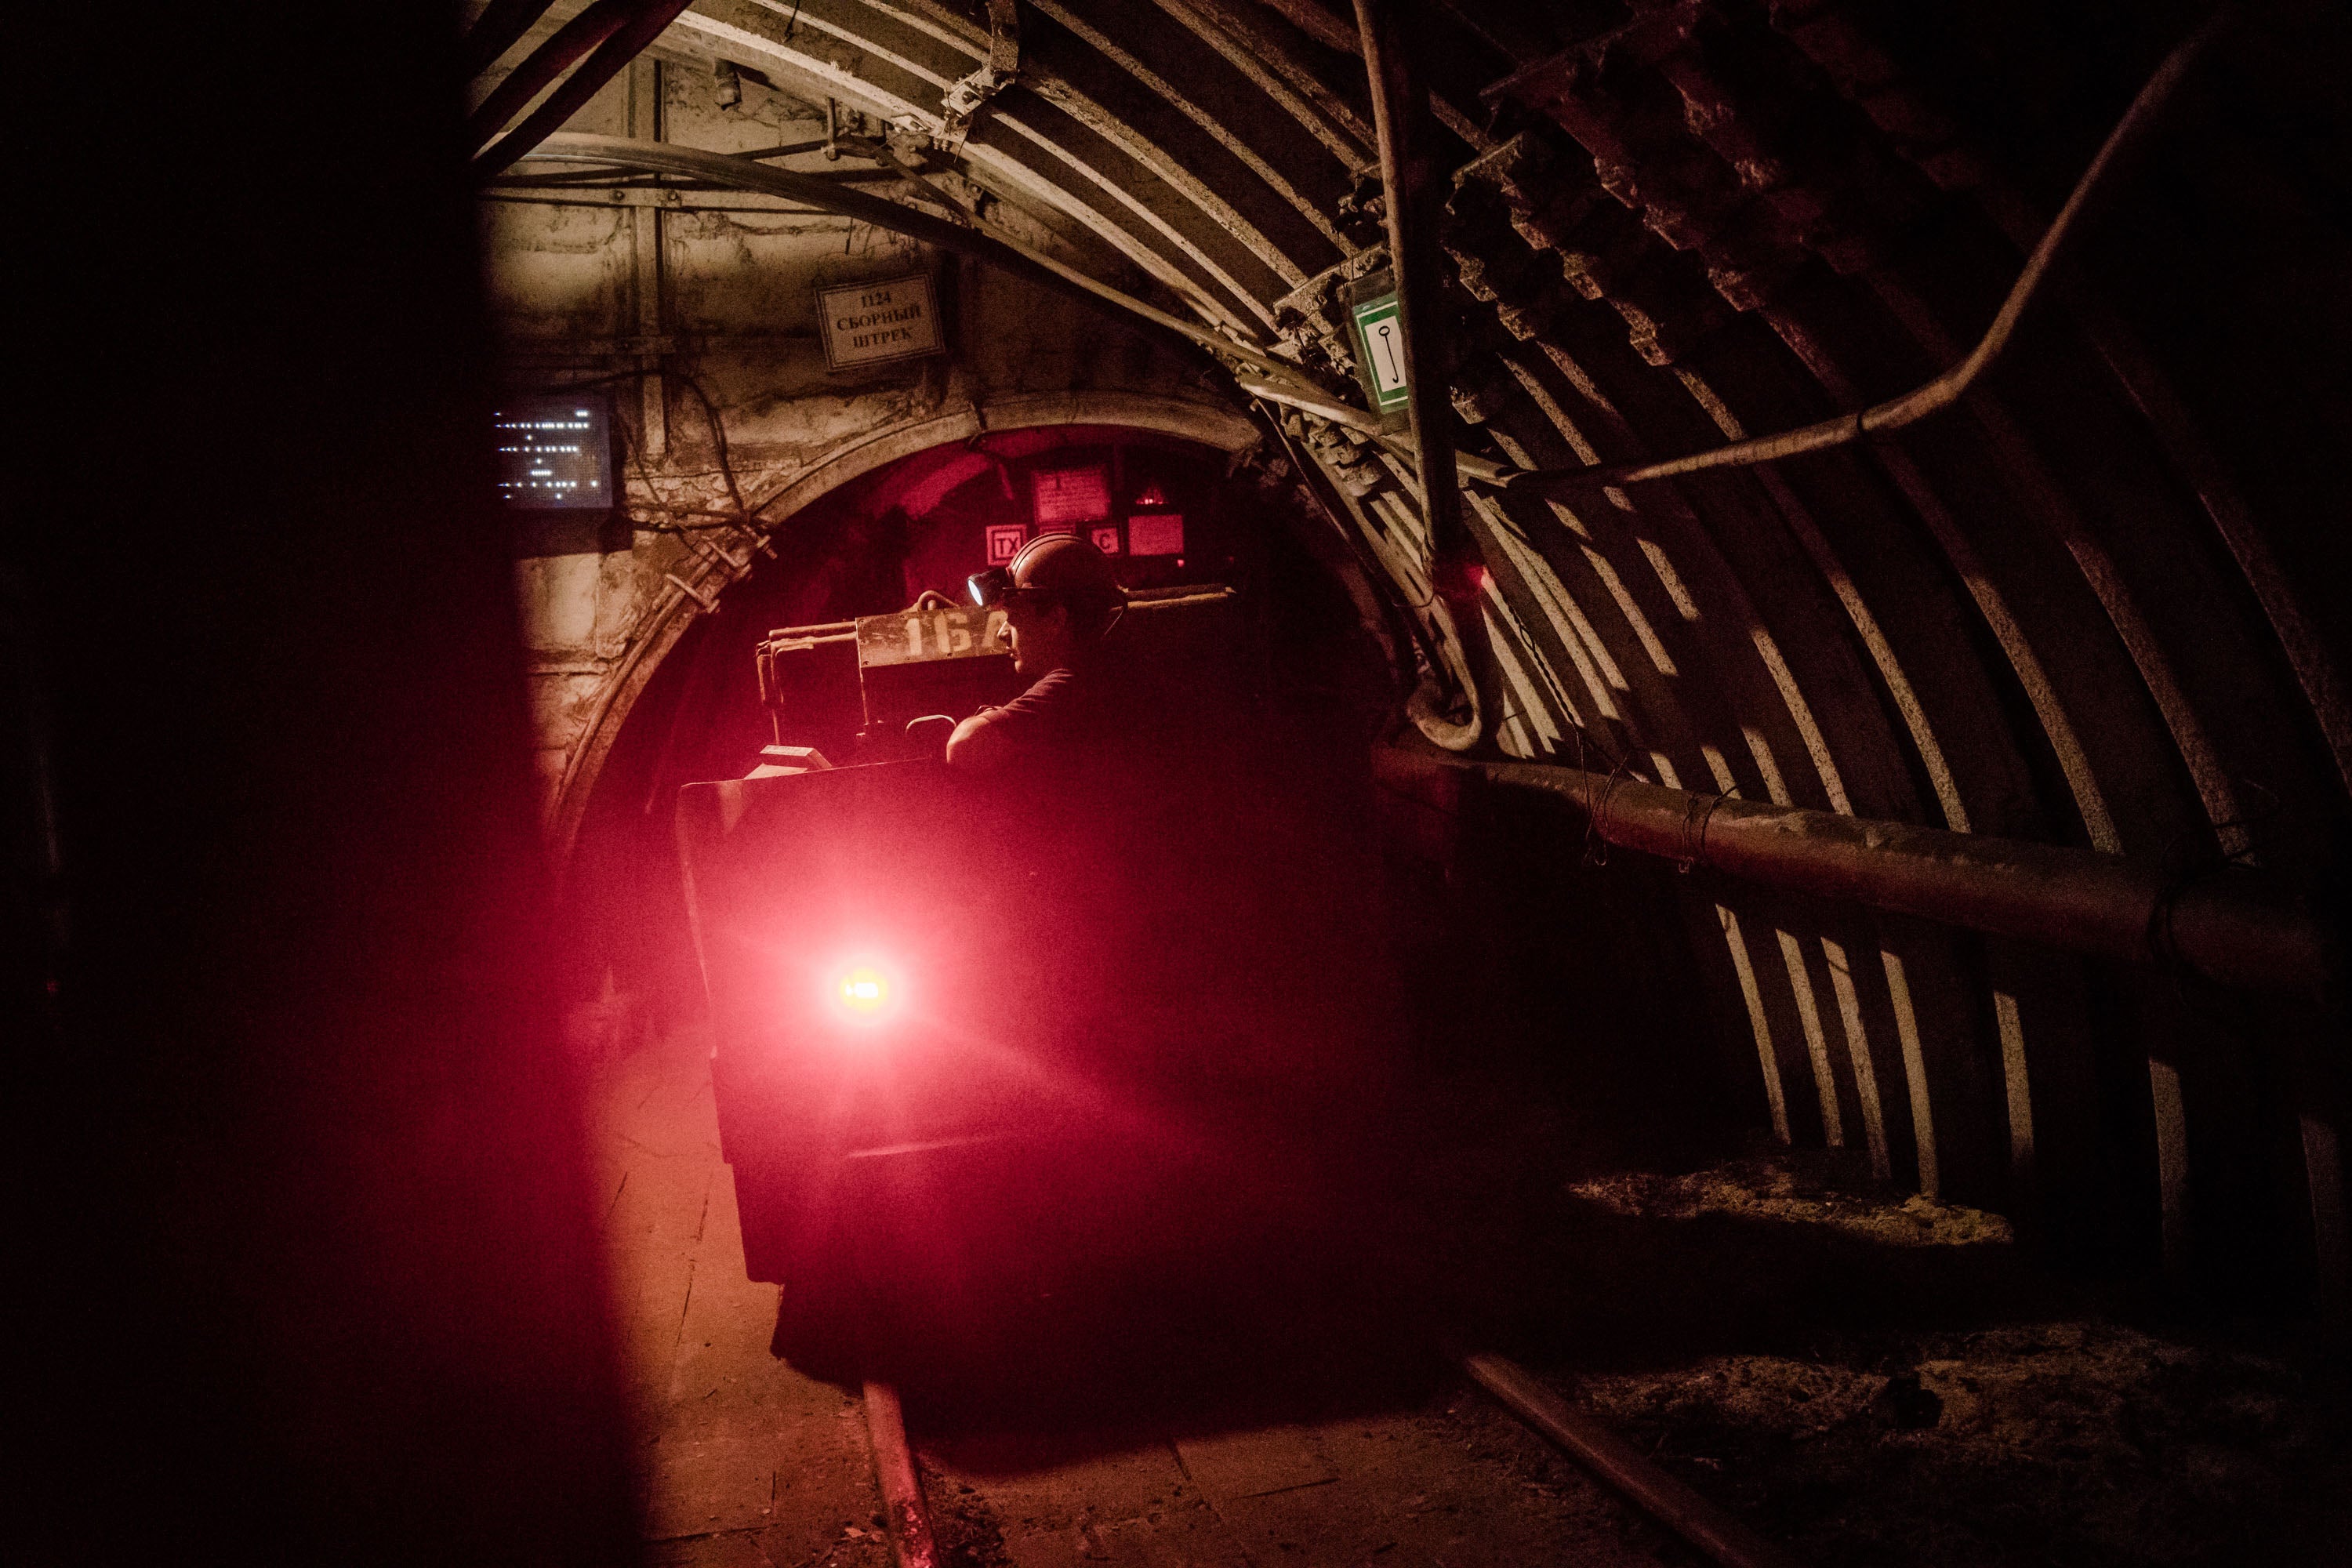 Coal miners travel by rail through miles of underground tunnels during their shift